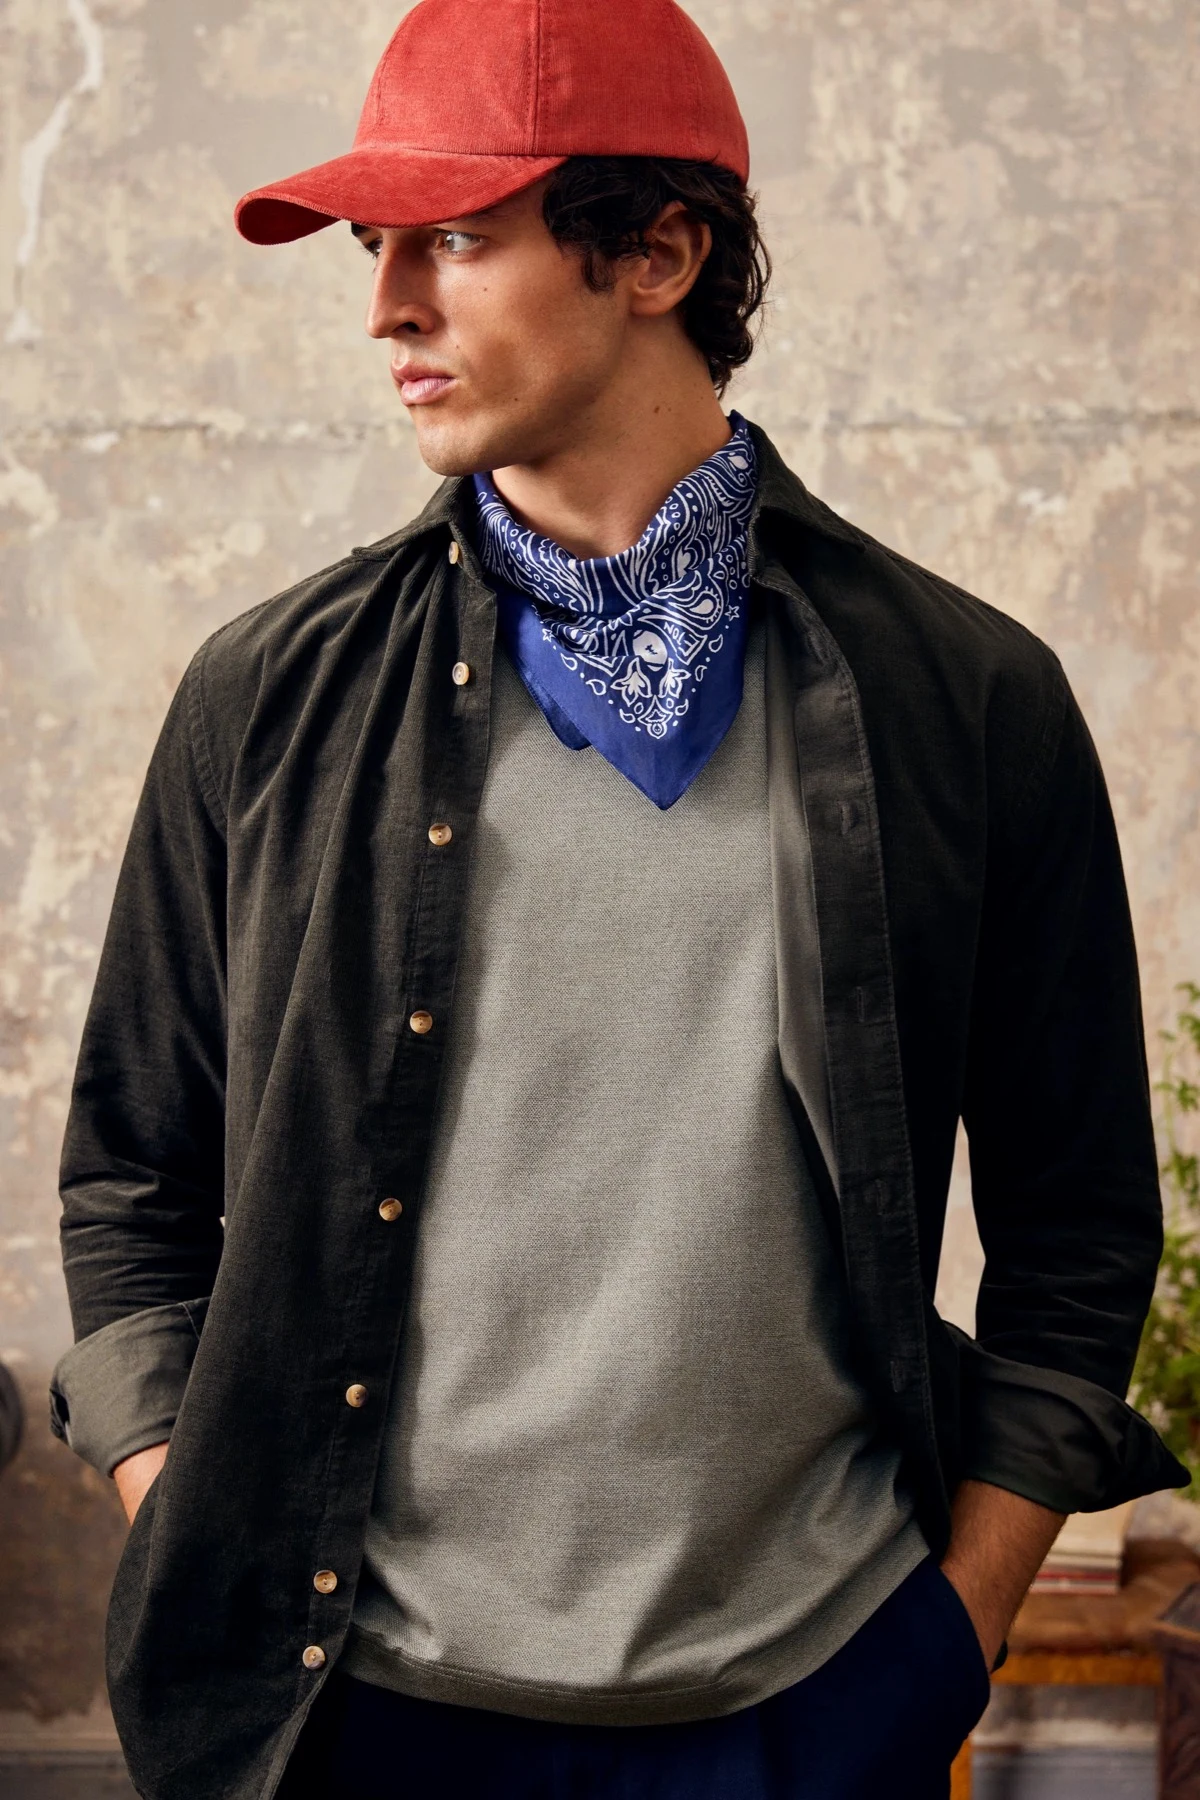 model wearing red cap and blue scarf casual styled